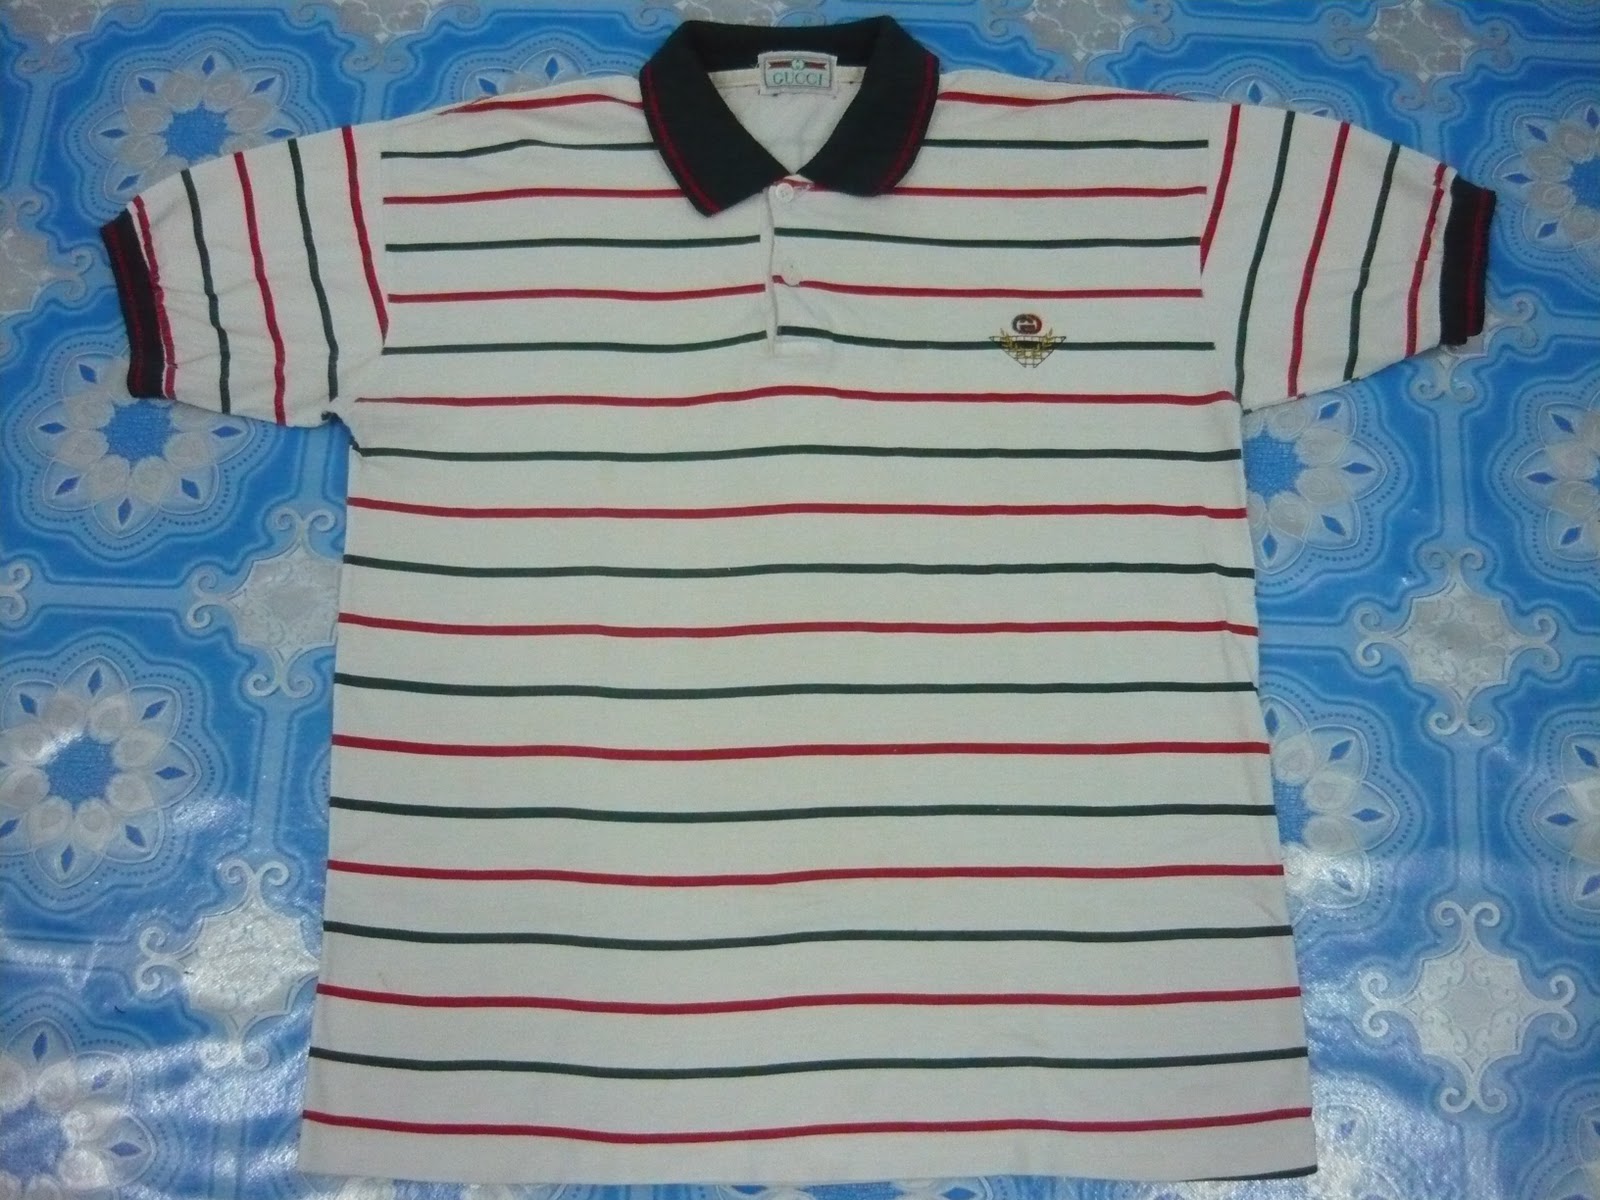 MCPICK VINTAGE: AUTHENTIC VINTAGE BRAND GUCCI POLO SHIRT(SOLD)